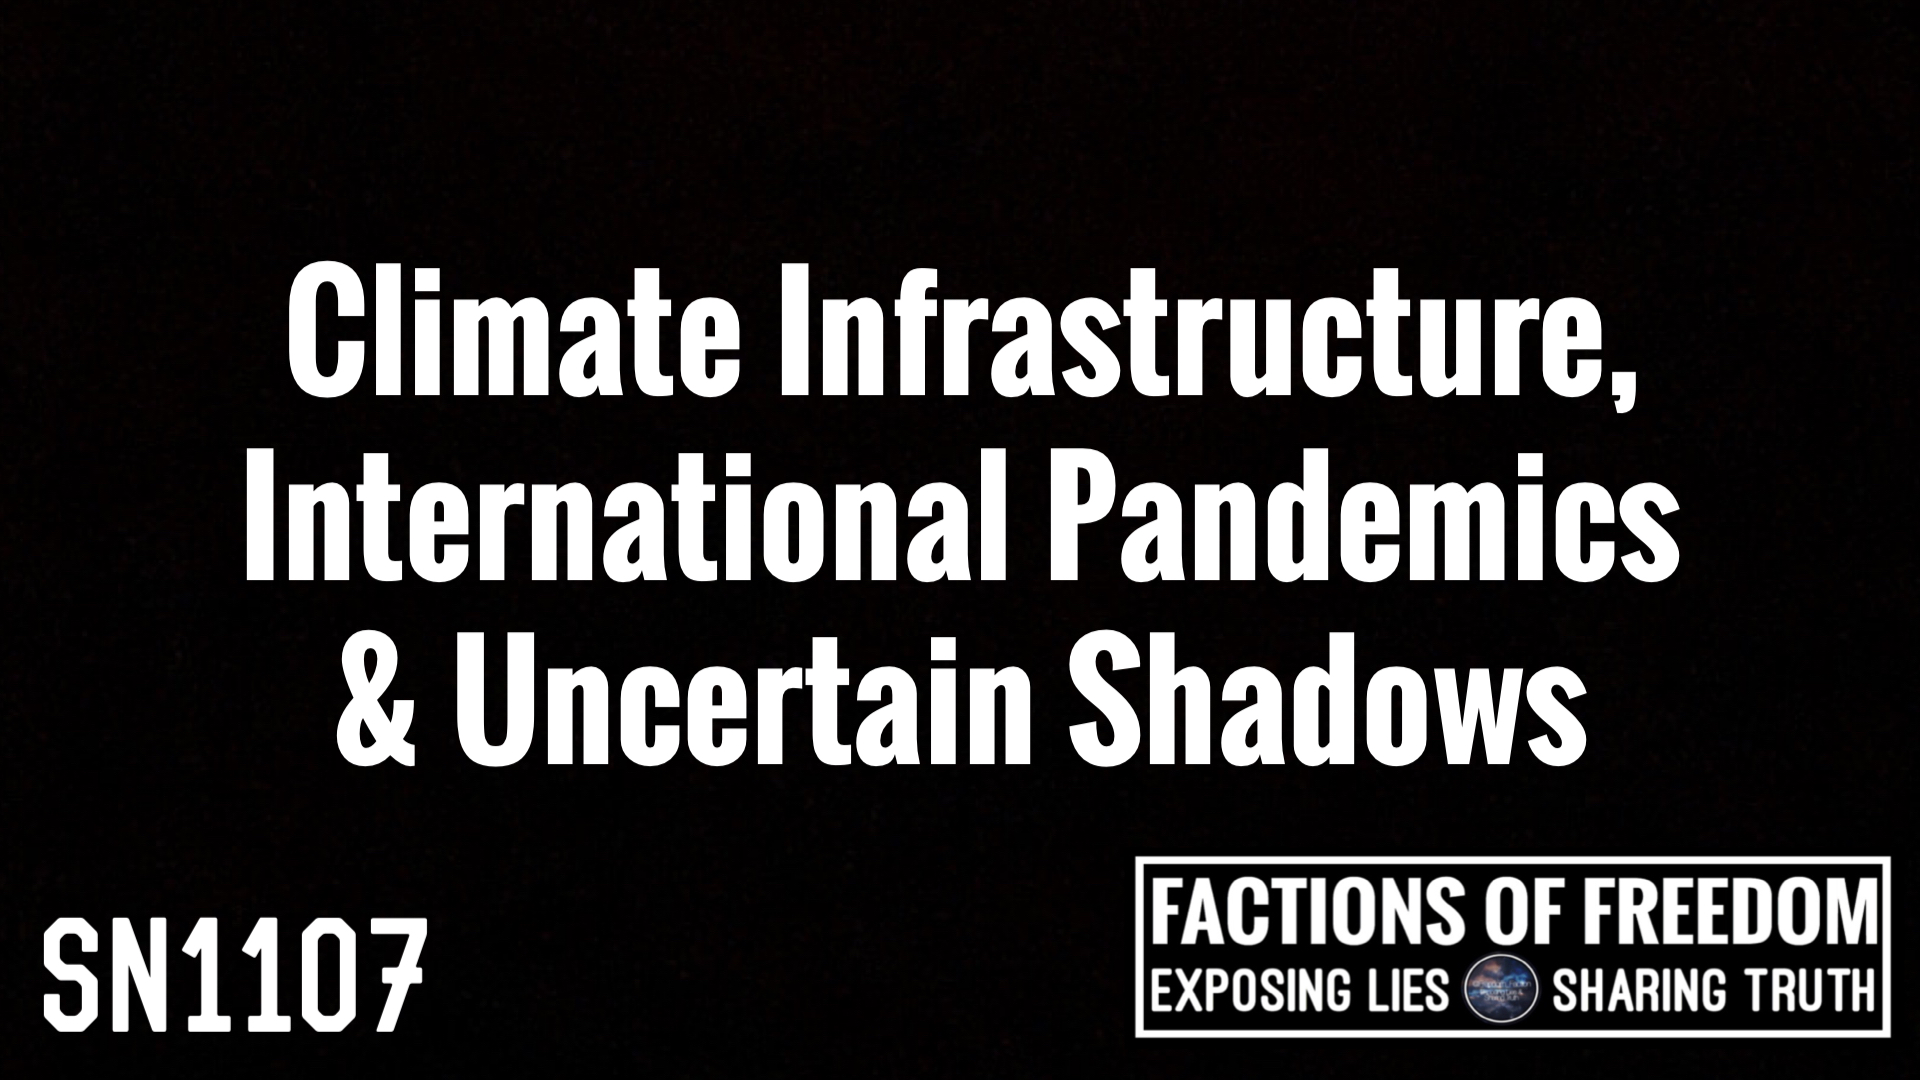 SN1107: Climate Infrastructure, International Epidemic & Uncertain Shadows ⚠️